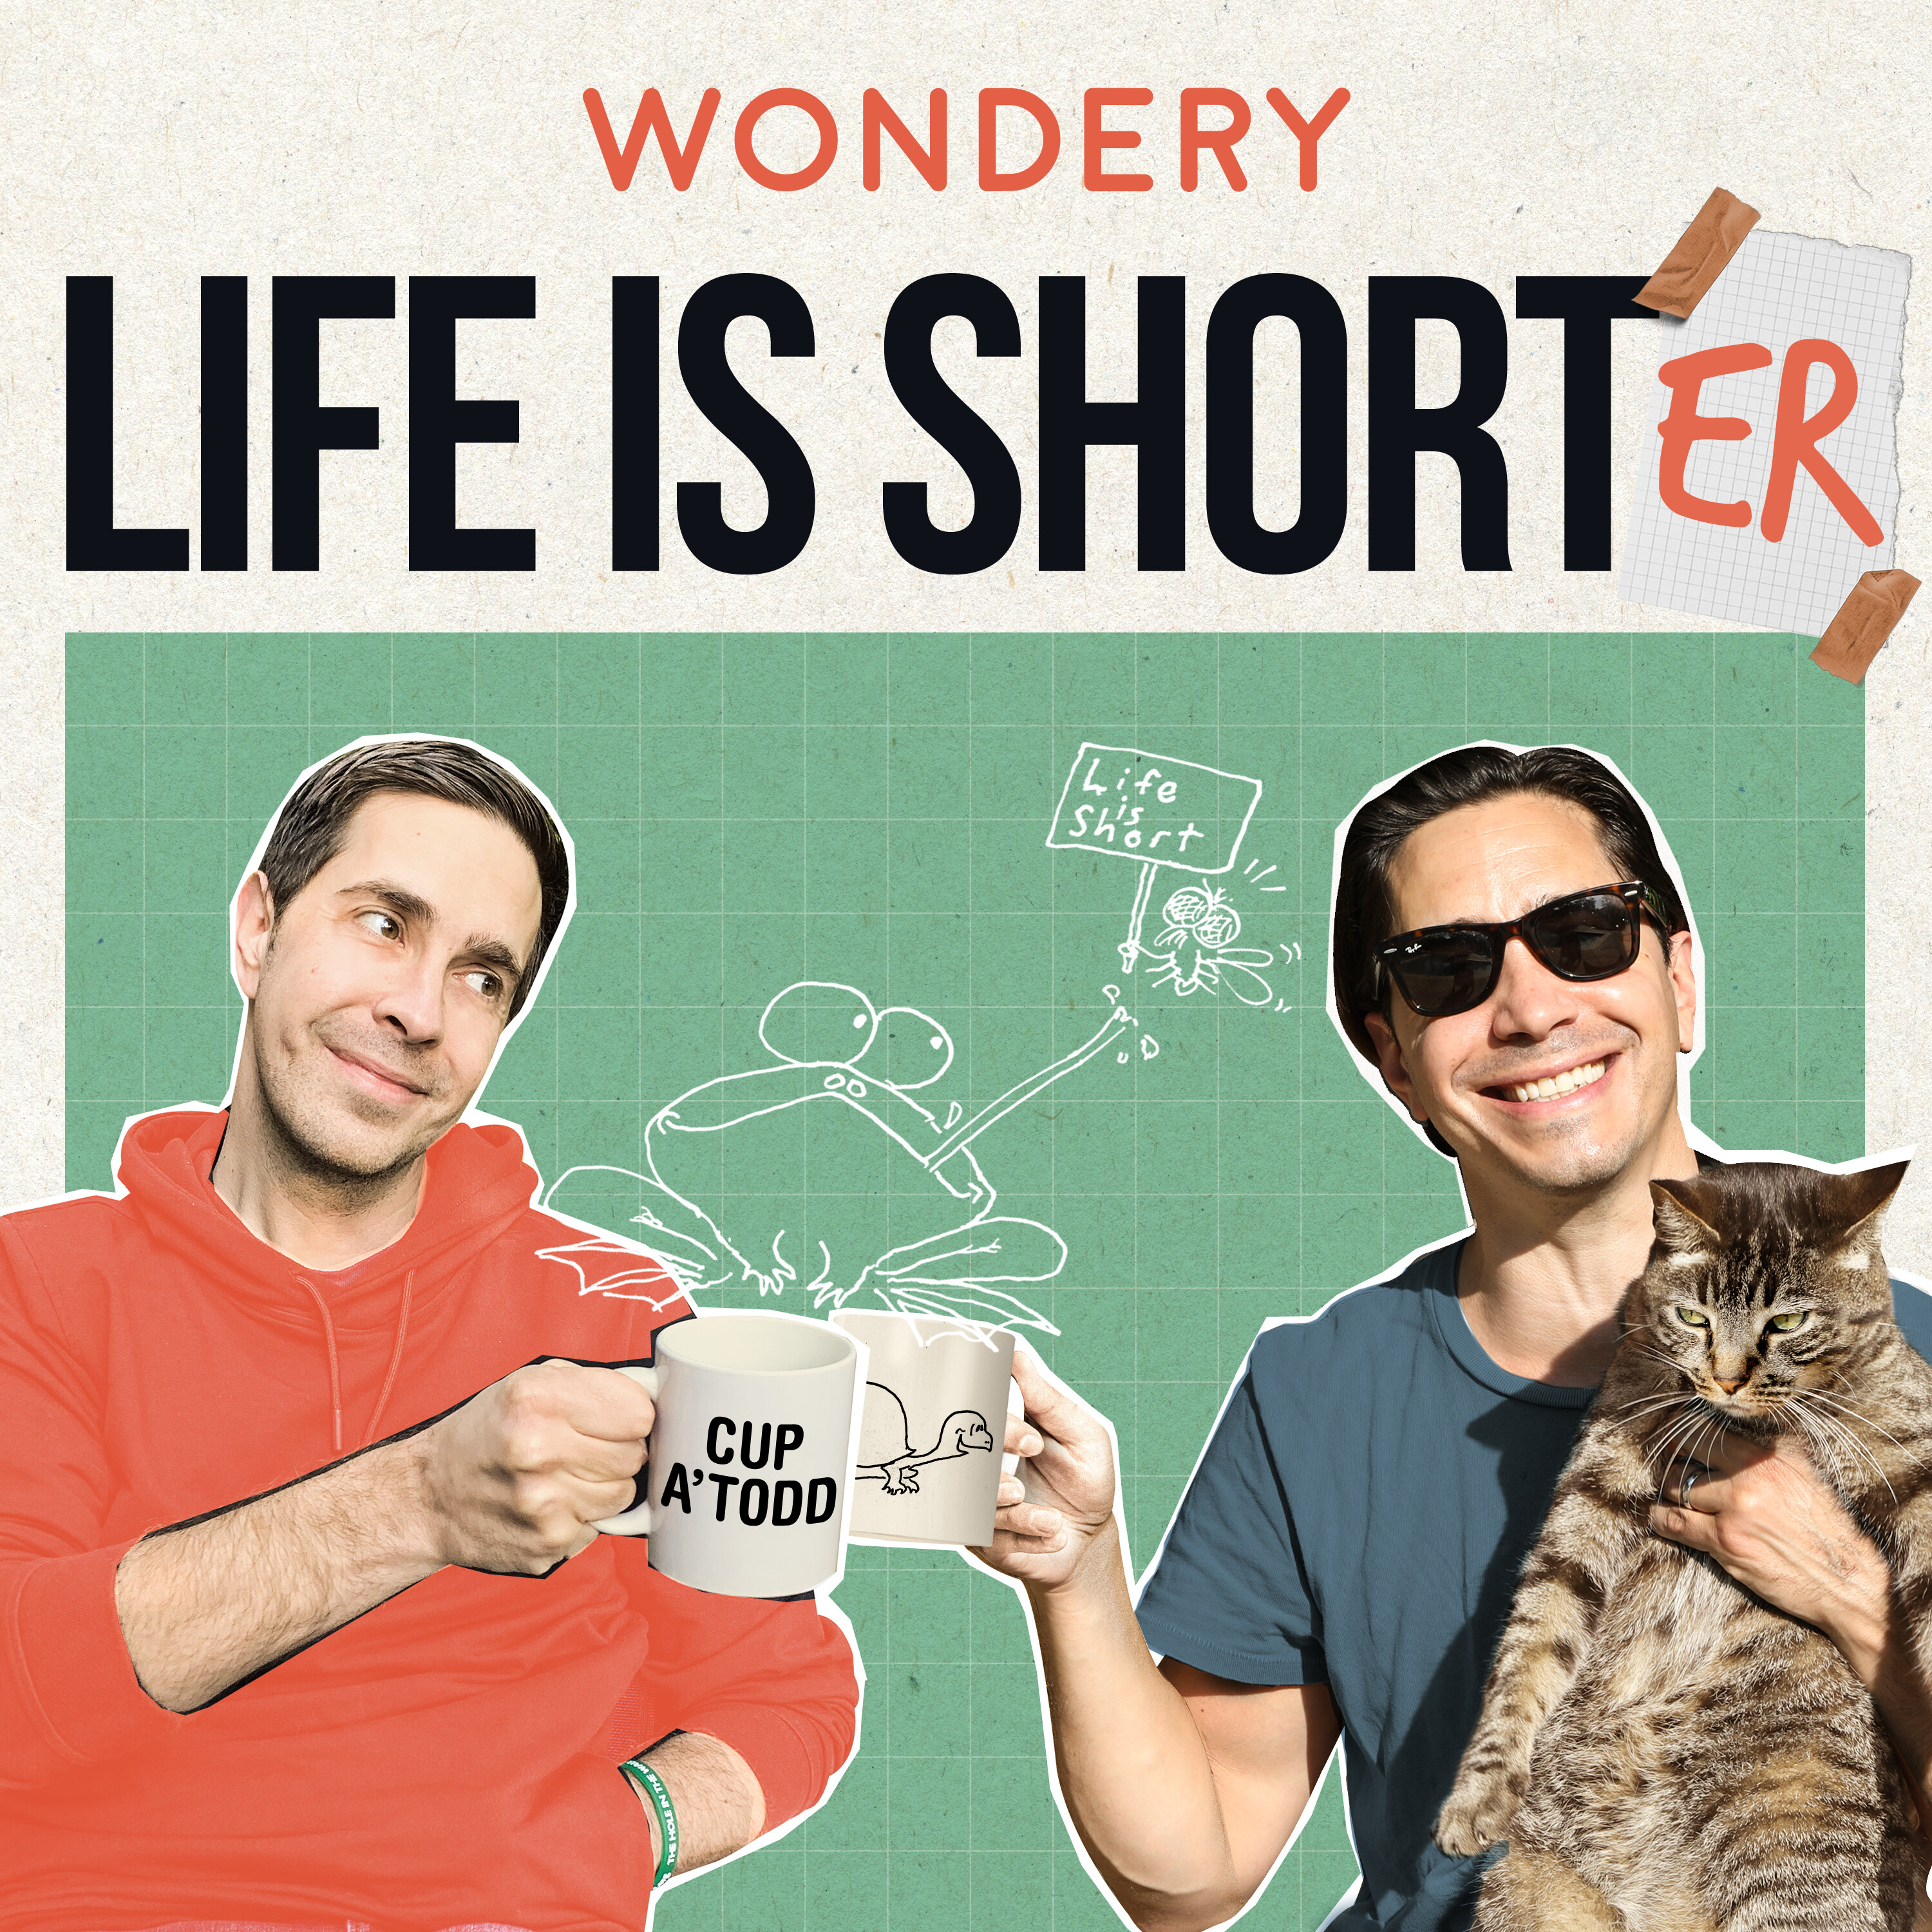 Life Is Short(er): Naked Attraction, Last Beatles Song, and SAT Punishment 👩‍💻 by Wondery